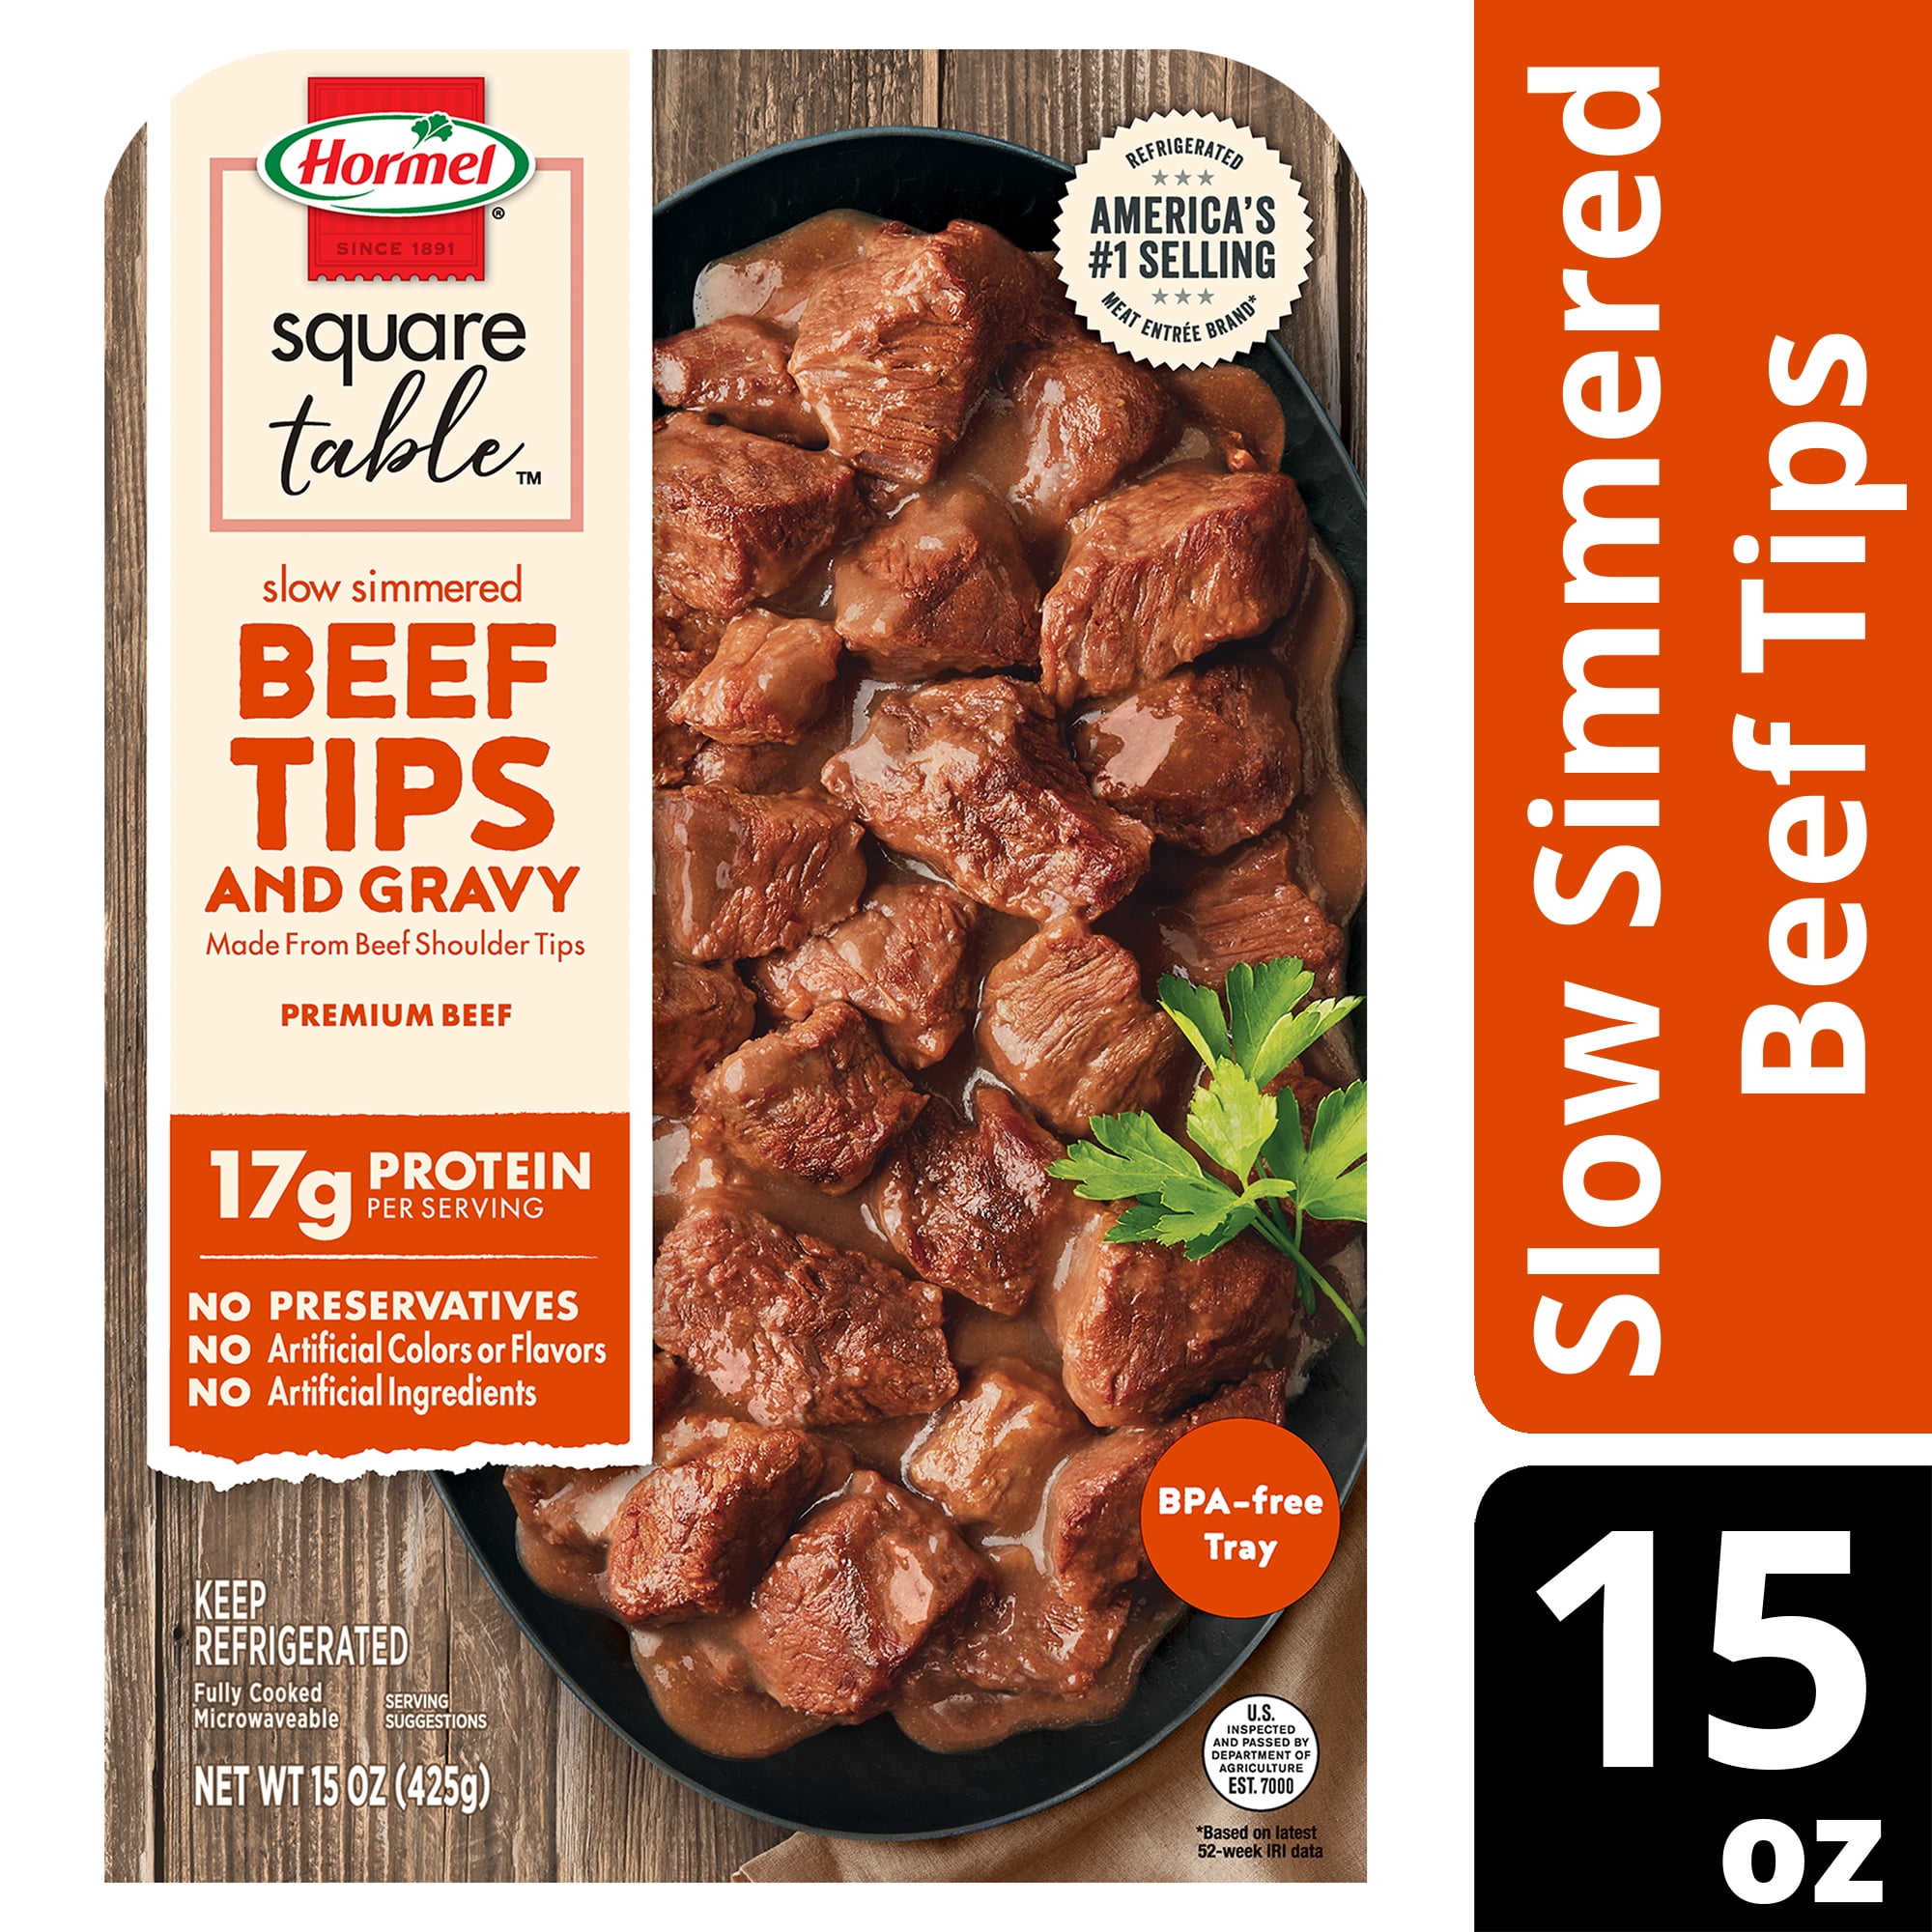 Hormel Square Table Slow Simmered Beef Tips & Gravy Refrigerated Entre, 15 oz Tray